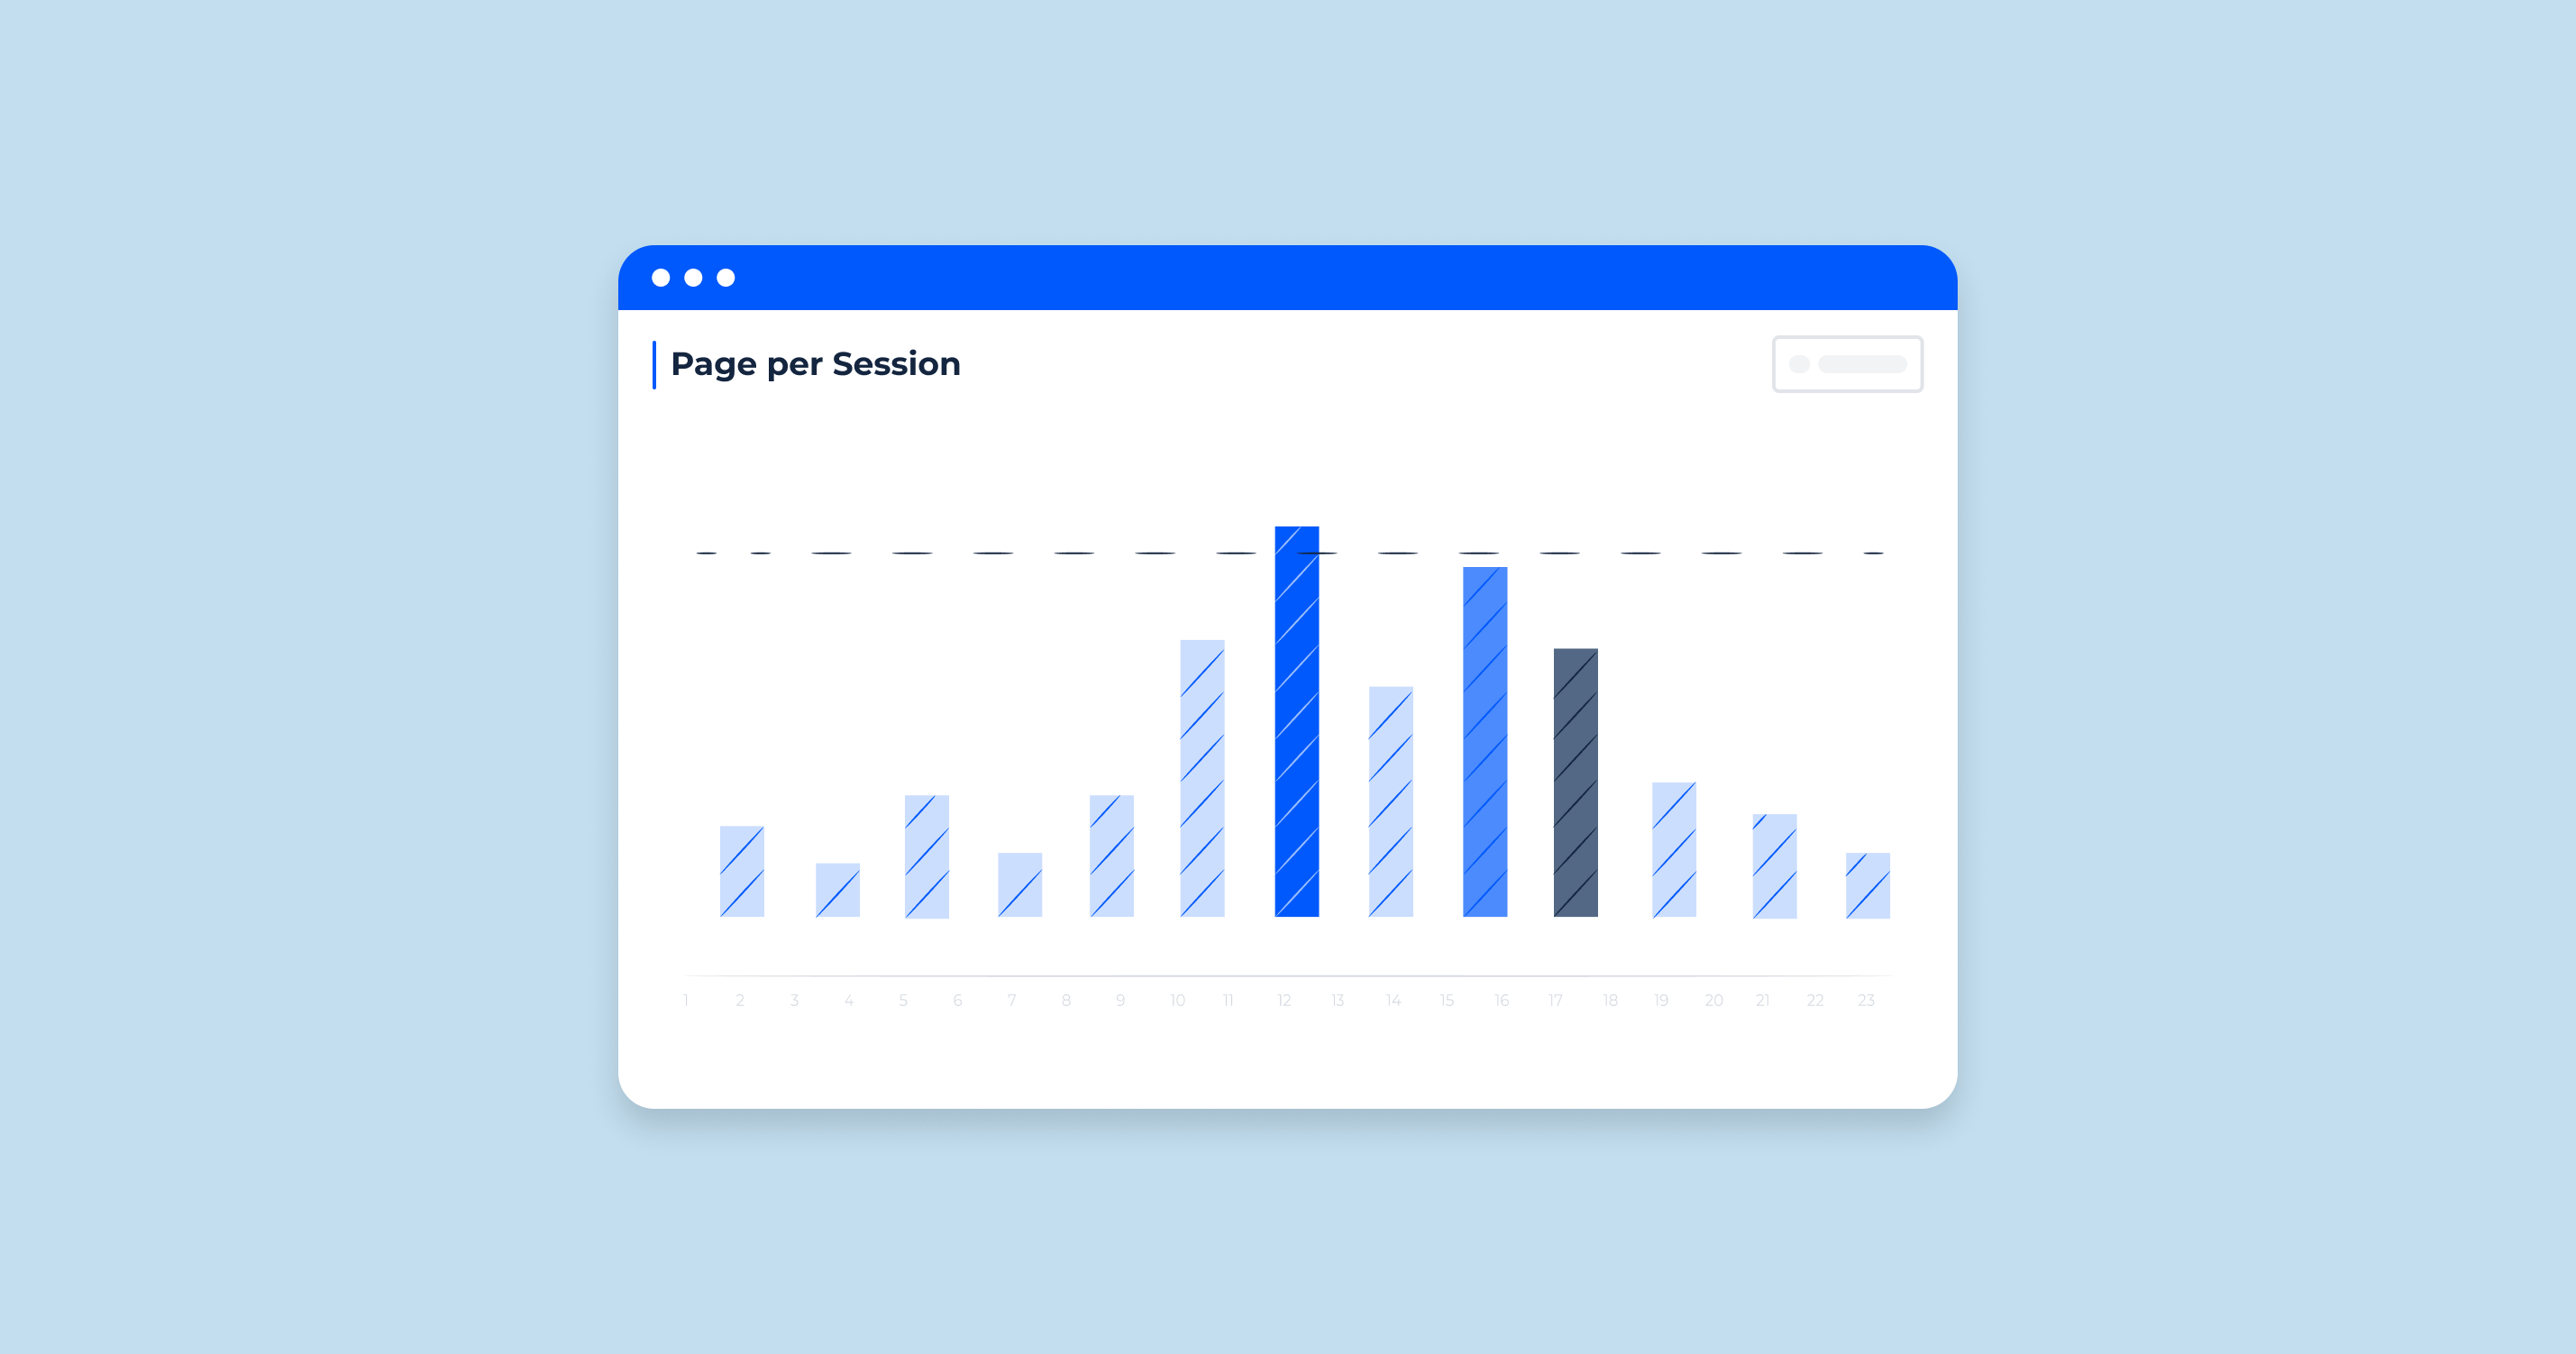 Pages Per Session: How to Calculate, Improve, and Understand Different Benchmarks Across Niches